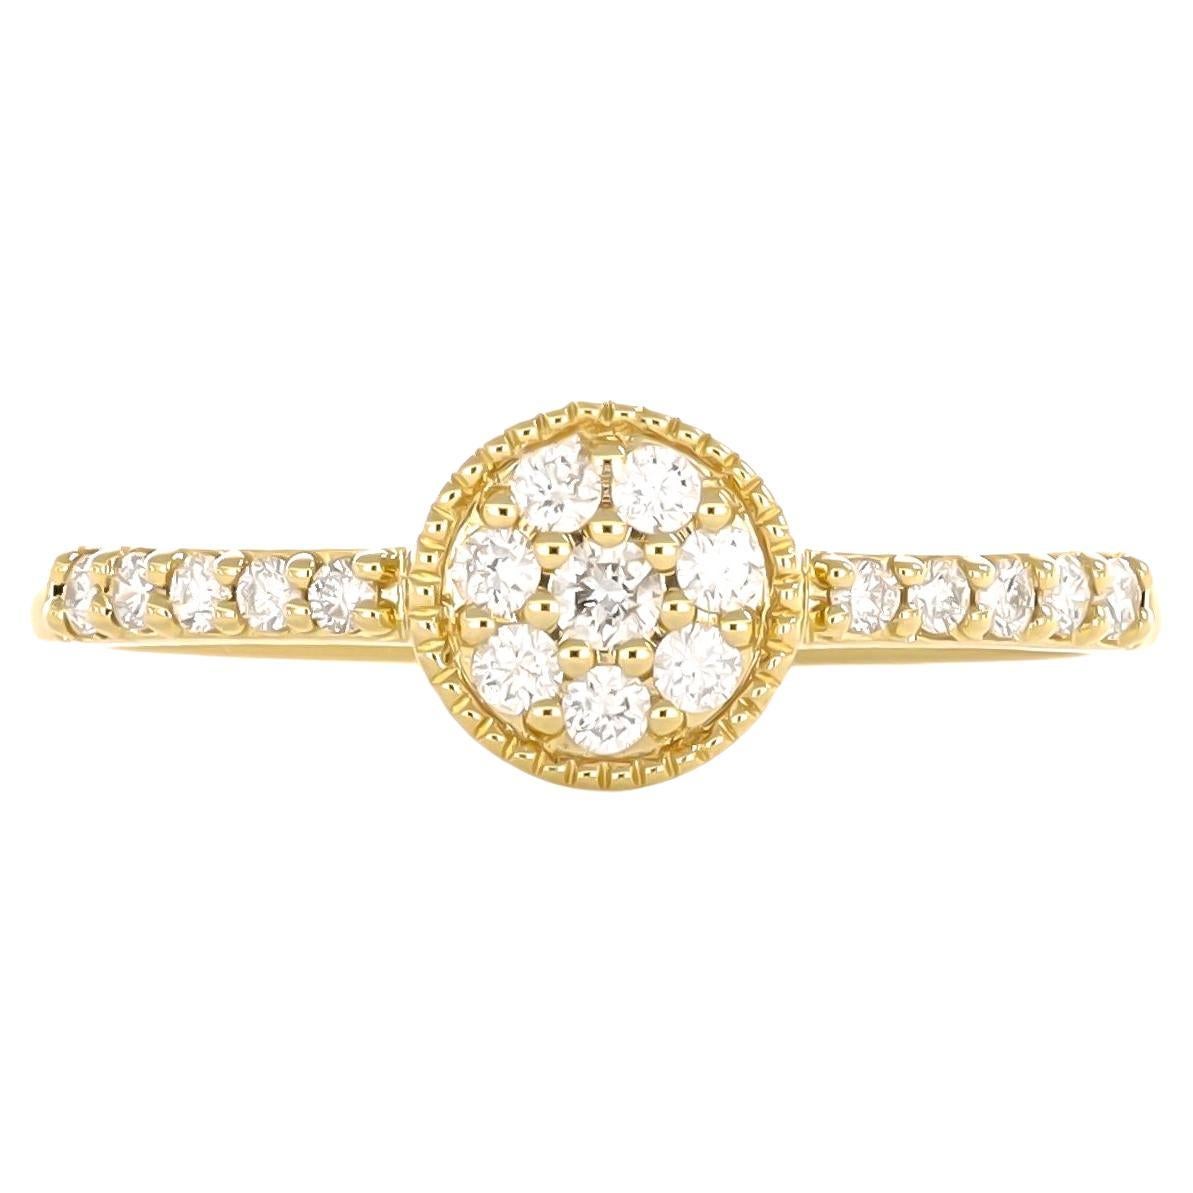 This minimalist white diamond ring embodies understated elegance with its simple cluster set design and accented shanks, making it an ideal choice for both everyday wear and thoughtful gifting.

With a total carat weight of 0.25, the diamonds are